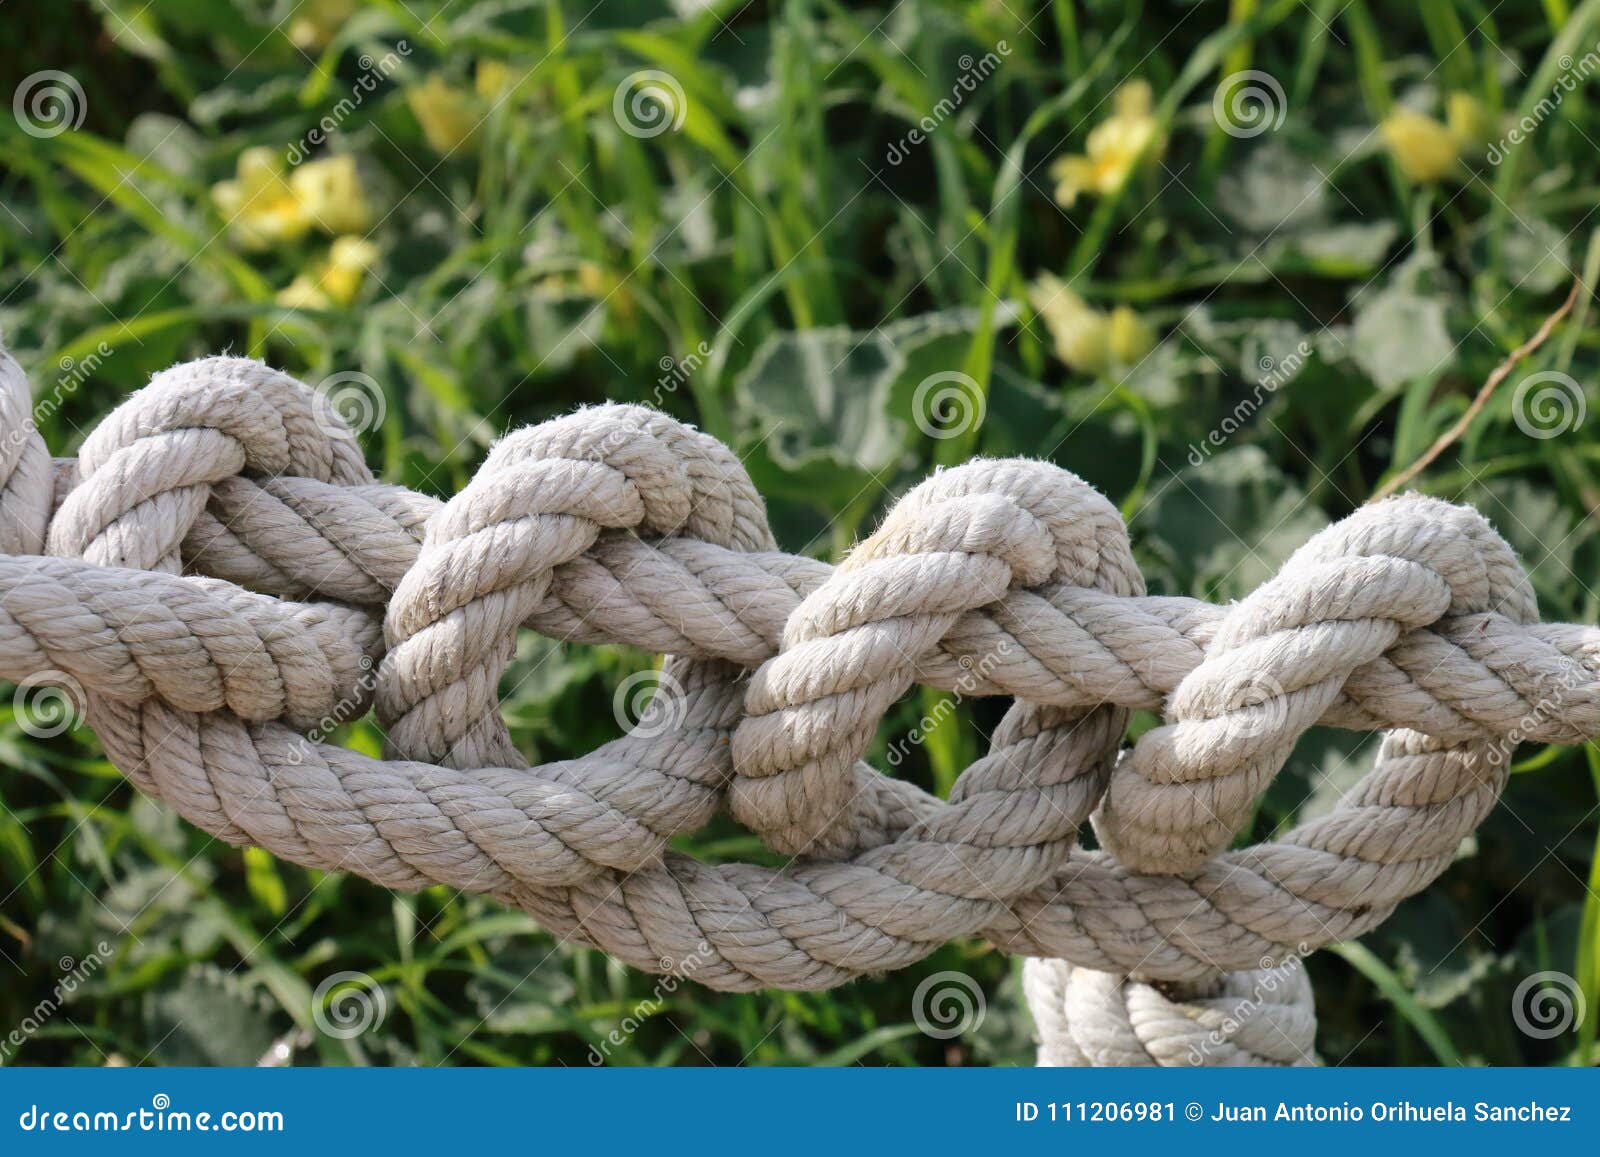 Thick rope with many knots stock image. Image of cape - 111206981